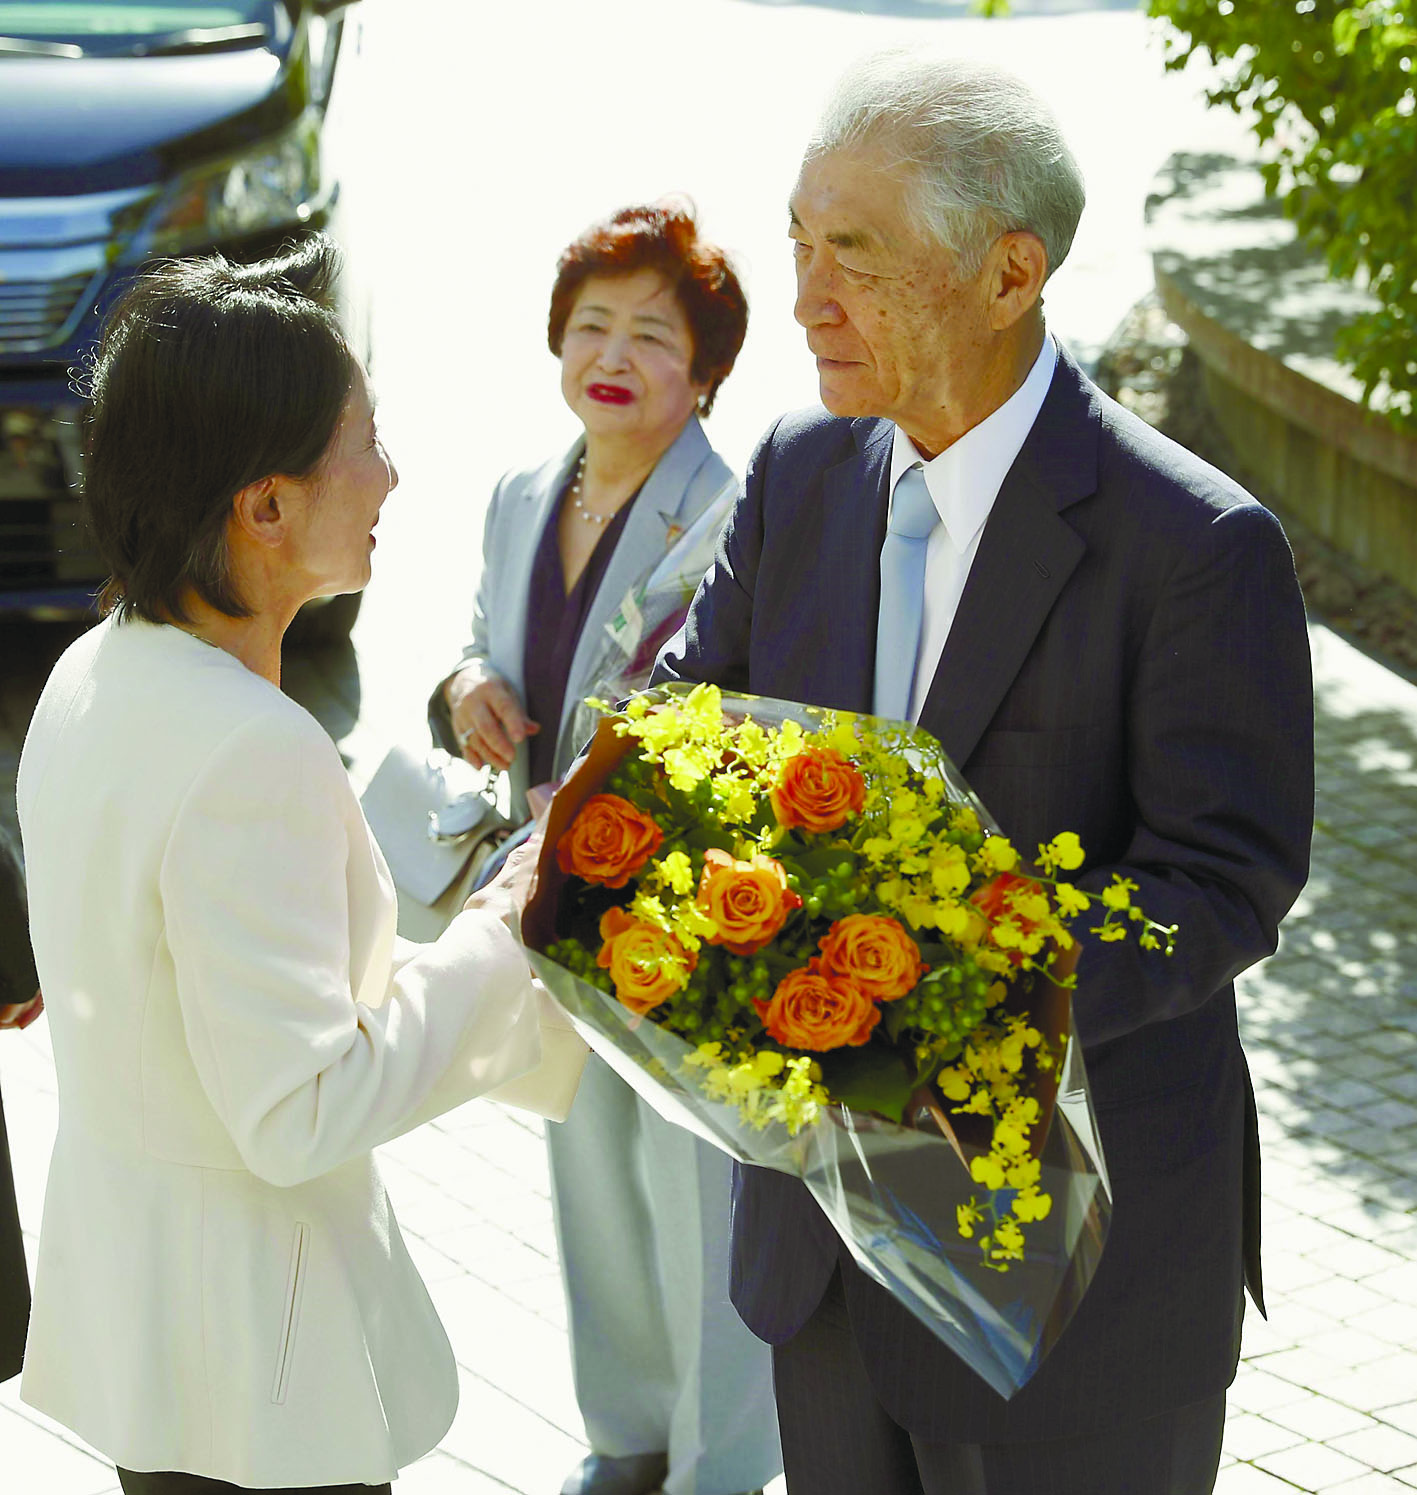 Tasuku Honjo, a professor at Kyoto University who jointly won this year’s Nobel Prize in medicine, receives flowers at the university Tuesday morning accompanied by his wife, Shigeko.  | KYODO